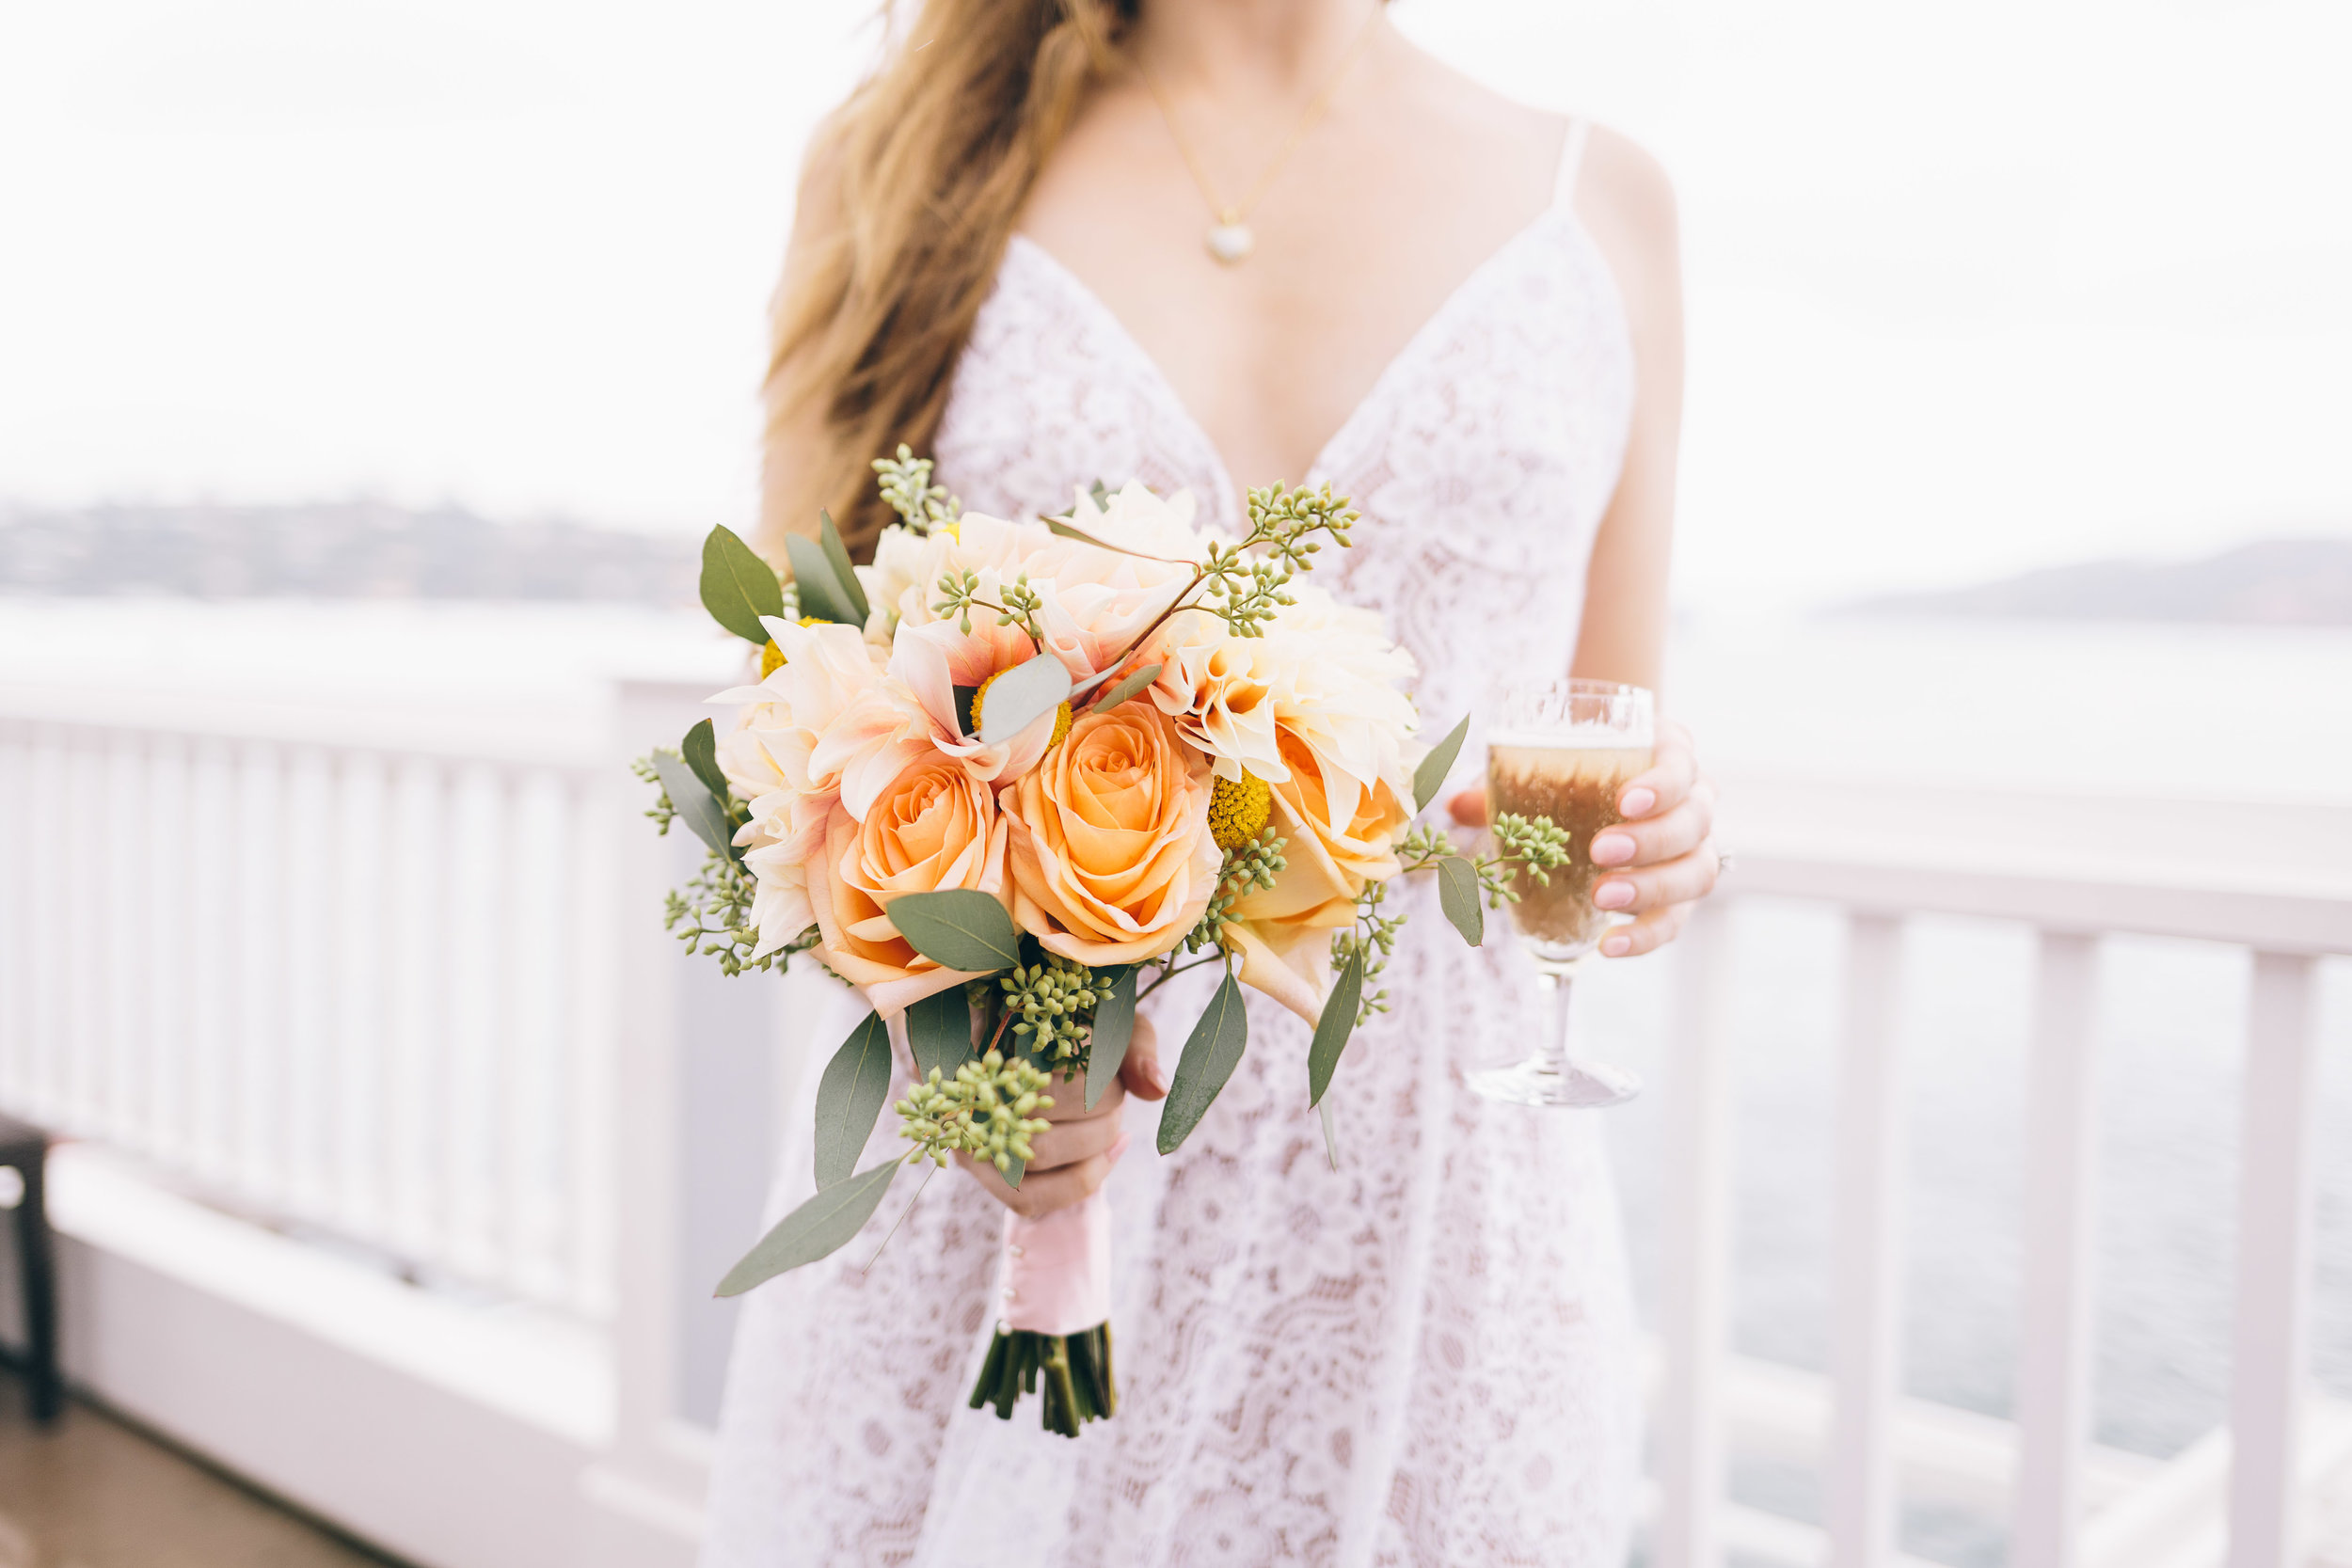 Sausalito Wedding at Ondine Events by JBJ Pictures - Photographer in Sausalito and Marin County - Engagment & Wedding Photography in San Francisco, Marin, Sonoma, and Napa (41).jpg